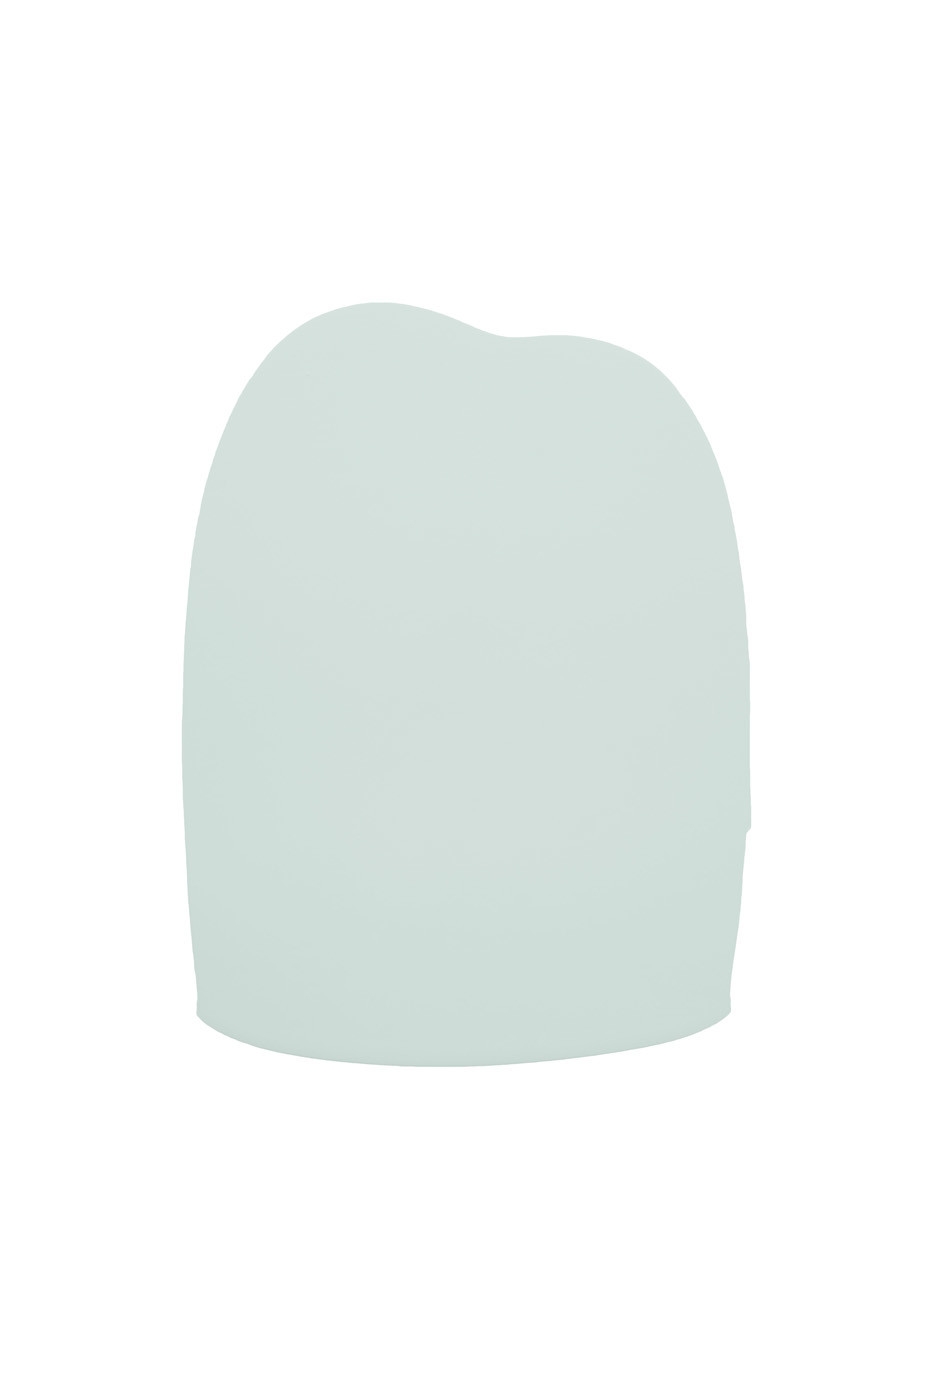 Clare Paint - Headspace - Swatch - Image 1